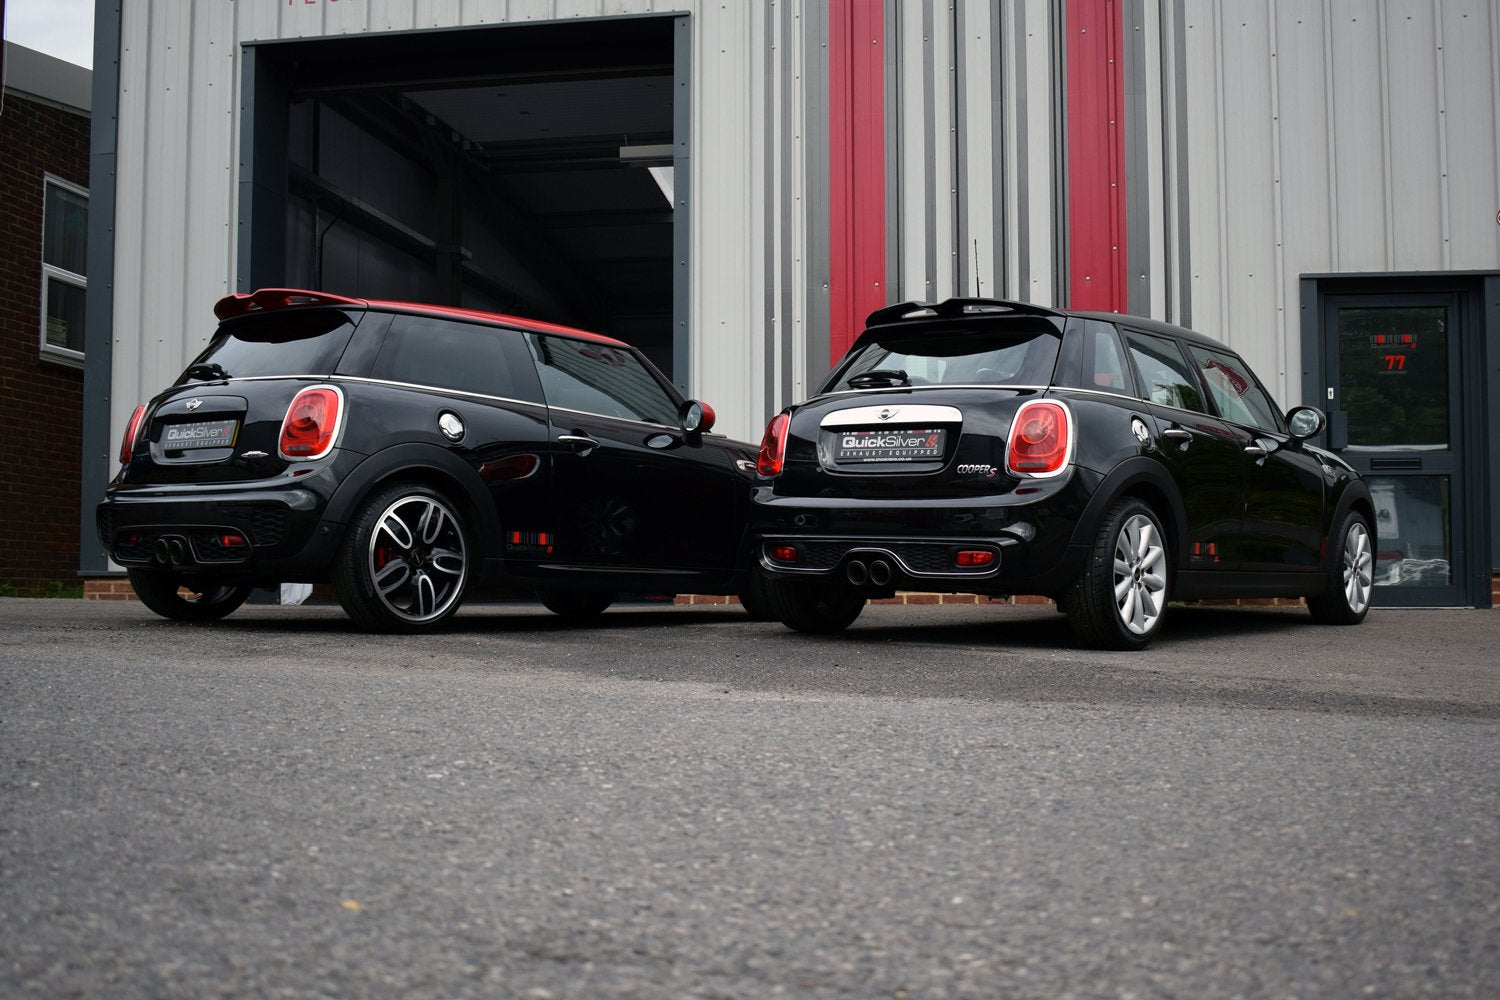 MINI Cooper S 2.0 3 Door and 5 Door inc. JCW (F56, F55) - Sport System with Sound Architect (2014 on)